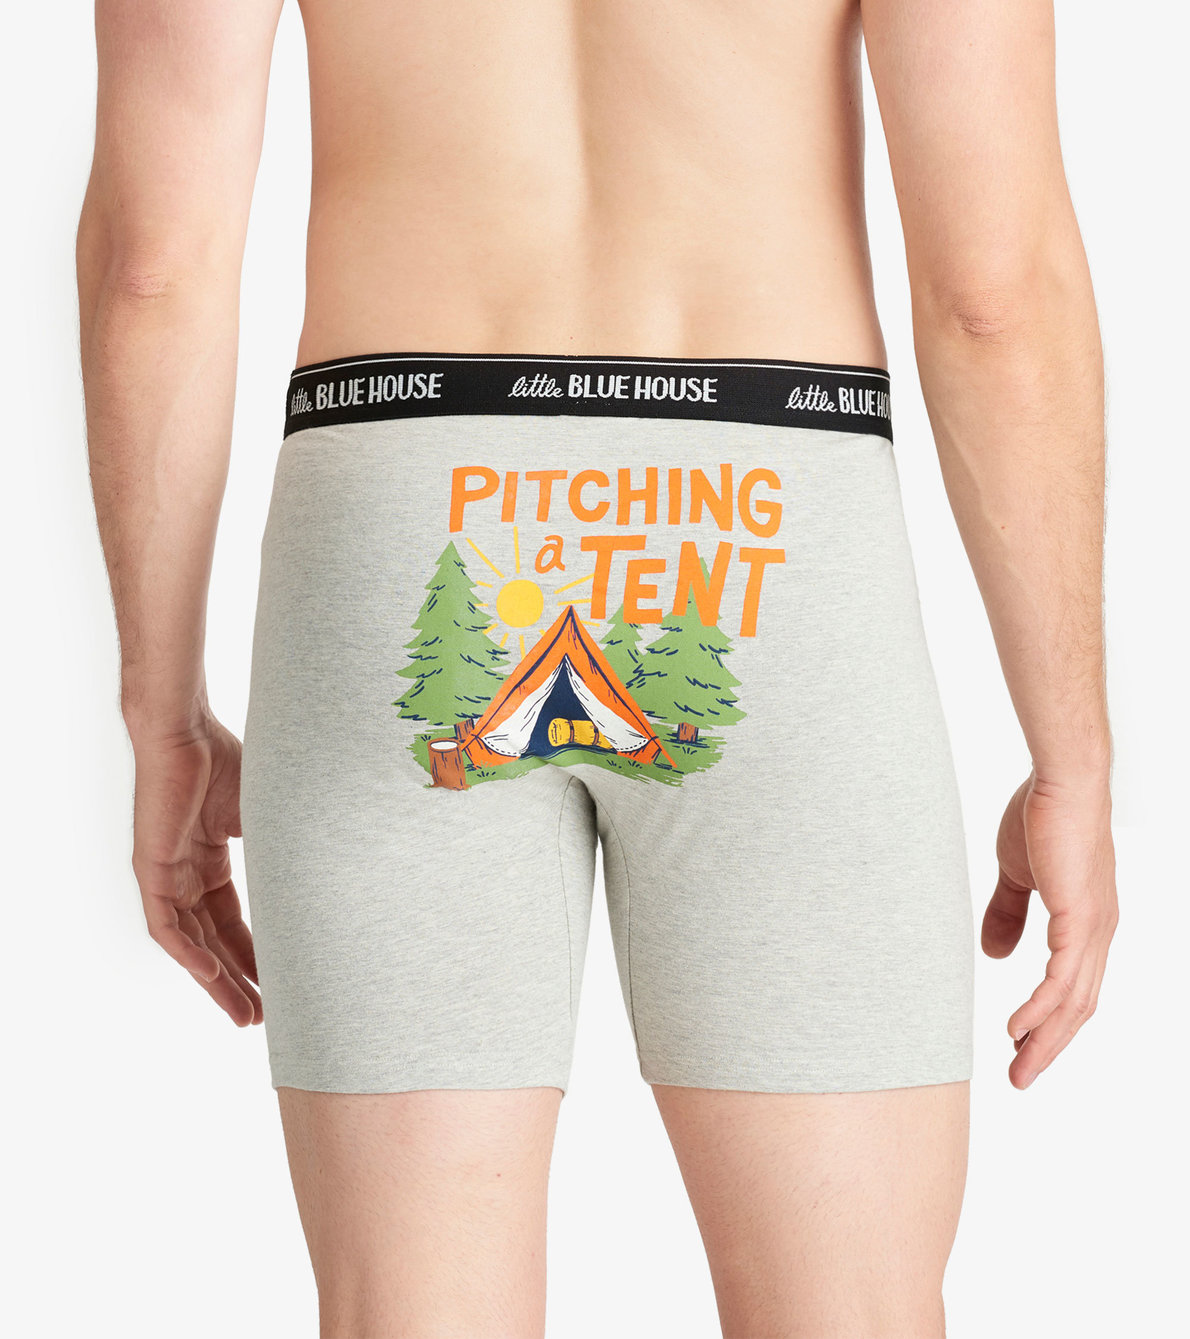 View larger image of Pitching A Tent Men's Boxer Briefs